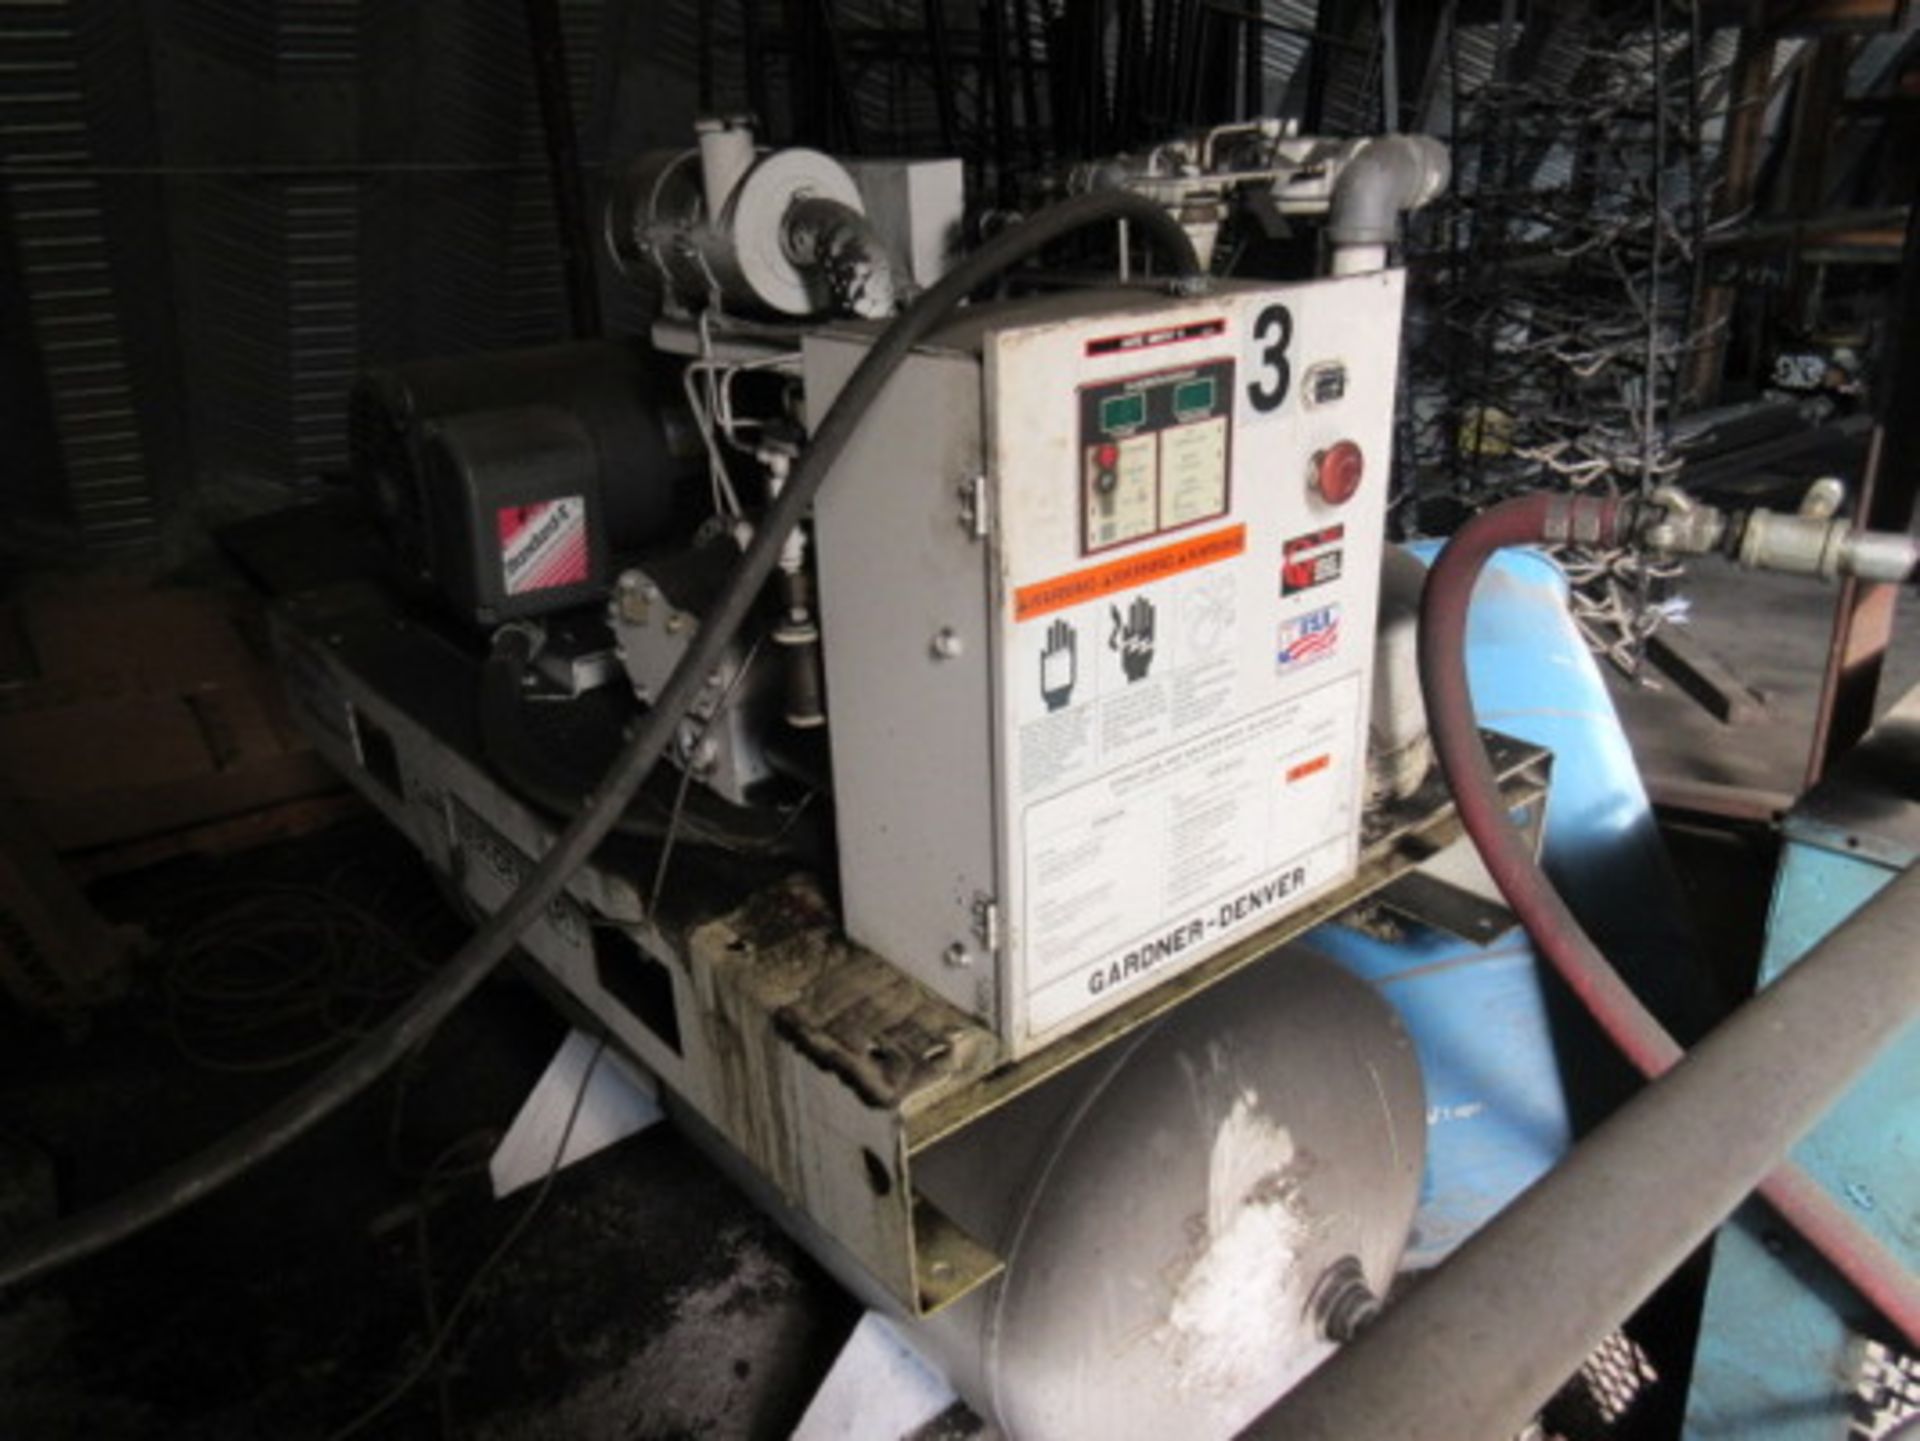 Lot Plant Support Equipment Consisting Of (1) Gardner-Denver 50HP Rotary Air Compressor, M/N-